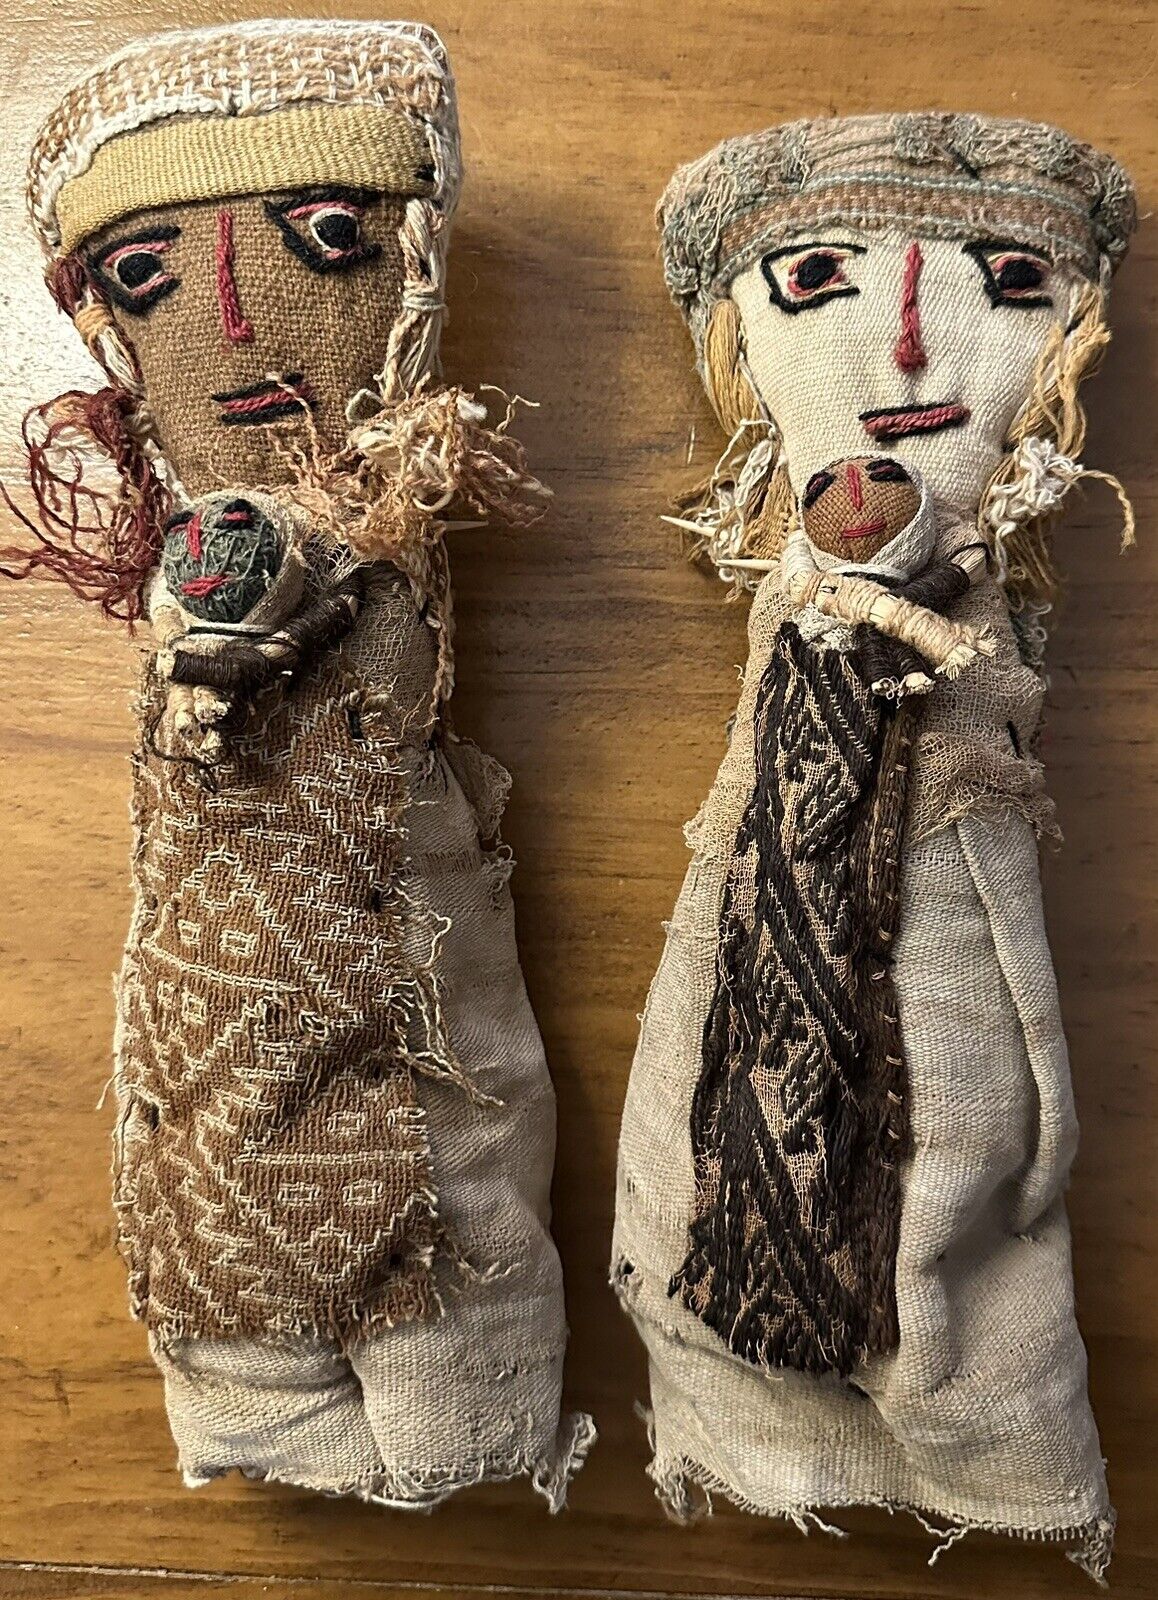 Lot Of 2 Antique Peruvian Folk Art Chancay Mother And Child Burial Doll 10” Long